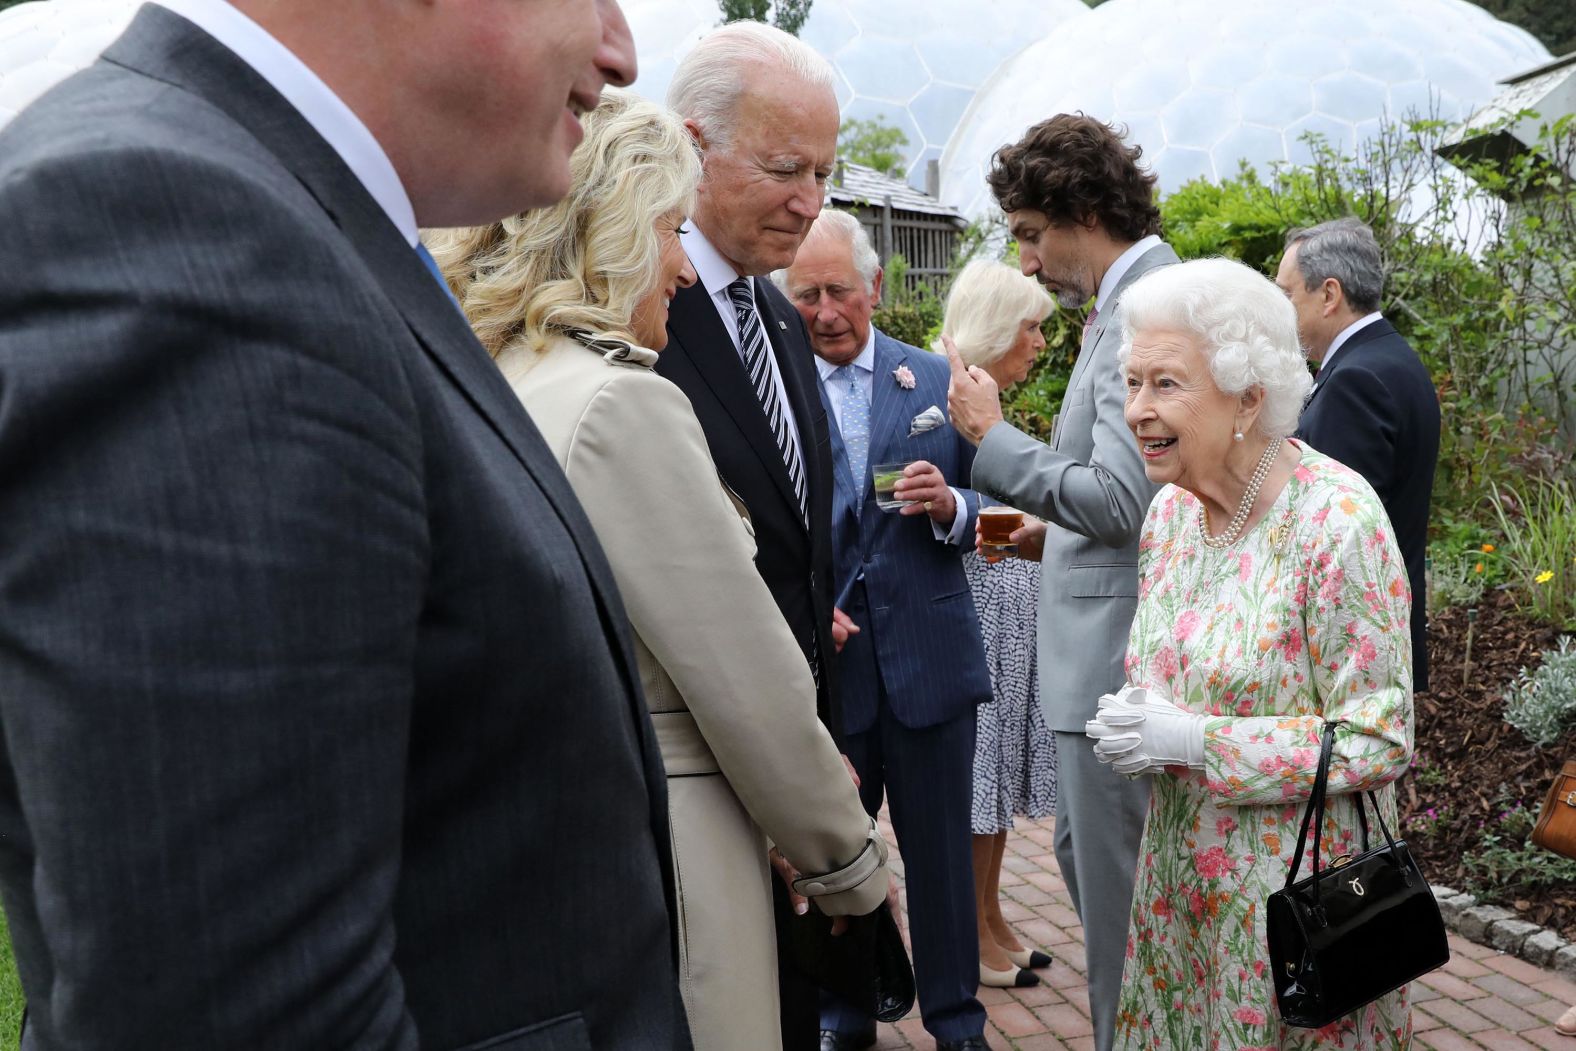 Queen Elizabeth II speaks with the Bidens during a reception at The Eden Project in Bodelva, England, on Friday.